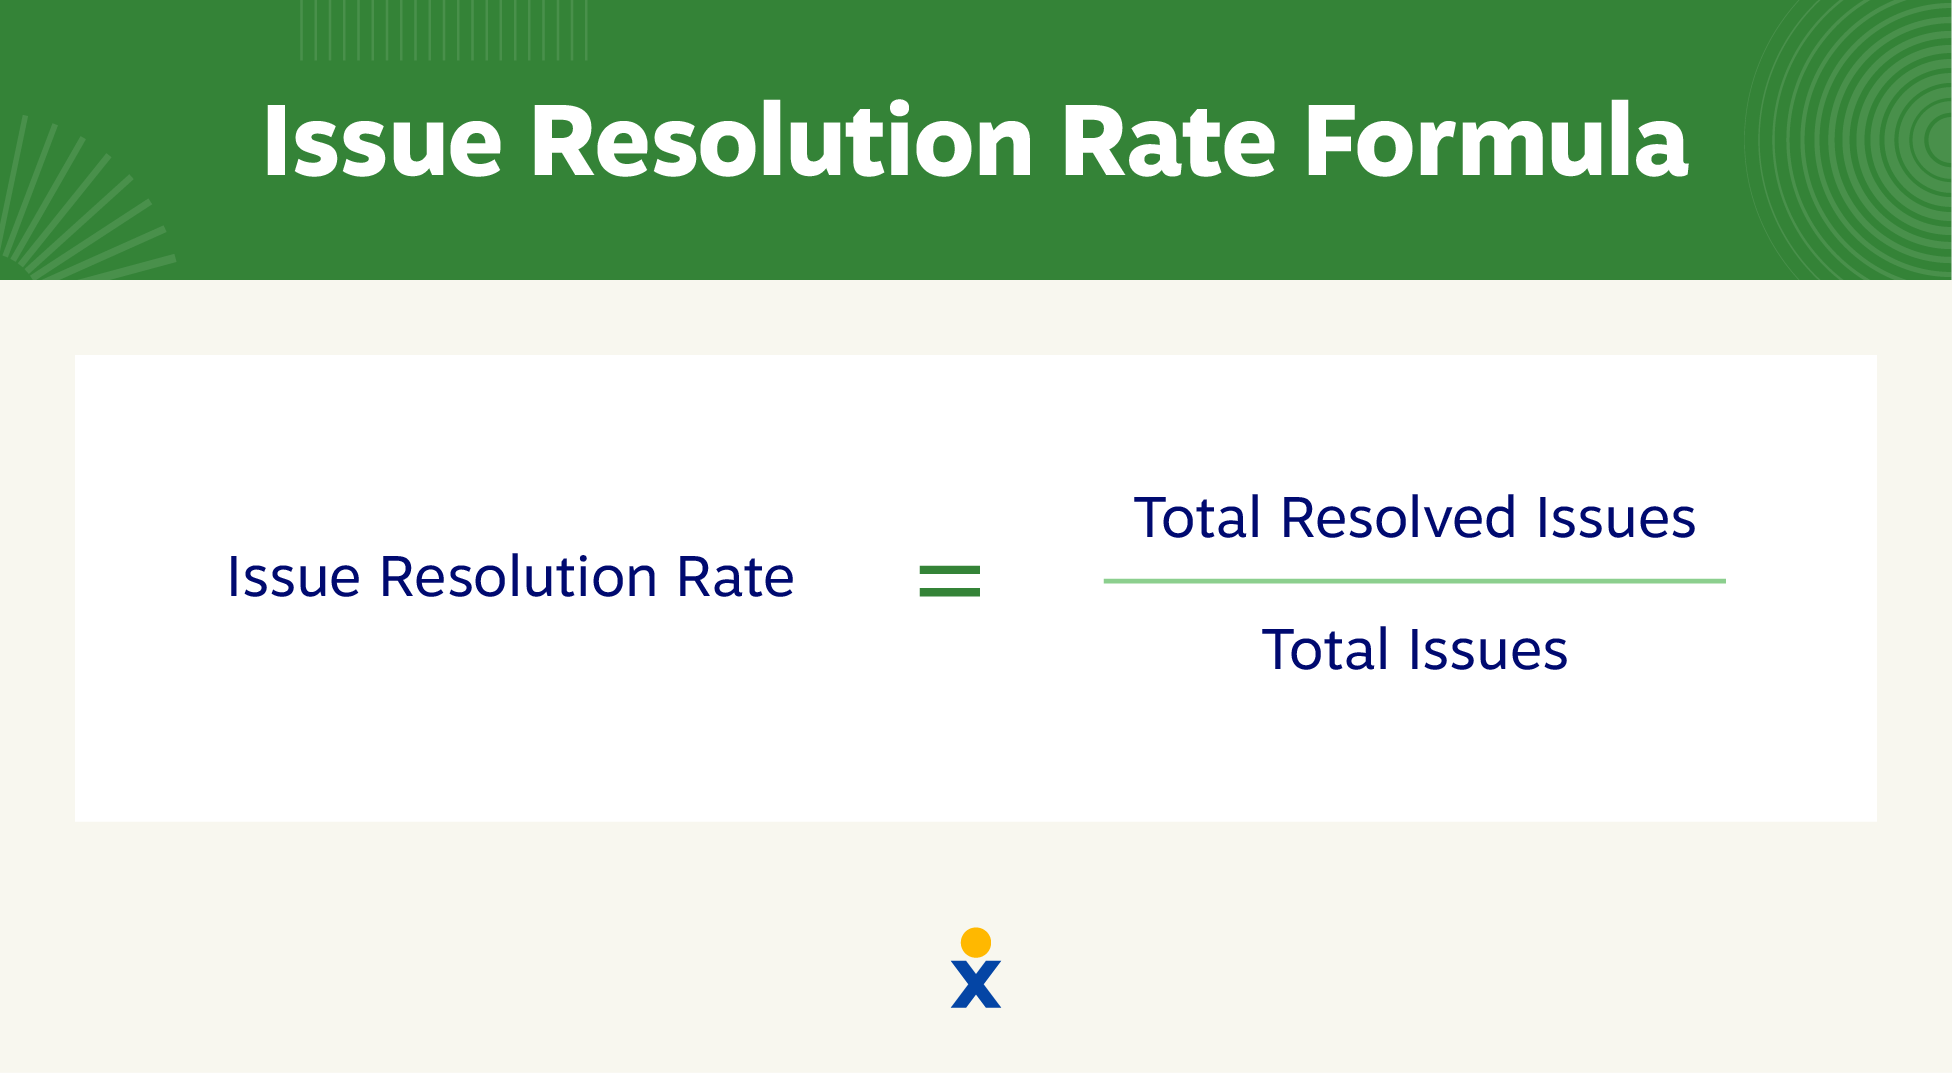 Issue Resolution Rate formula